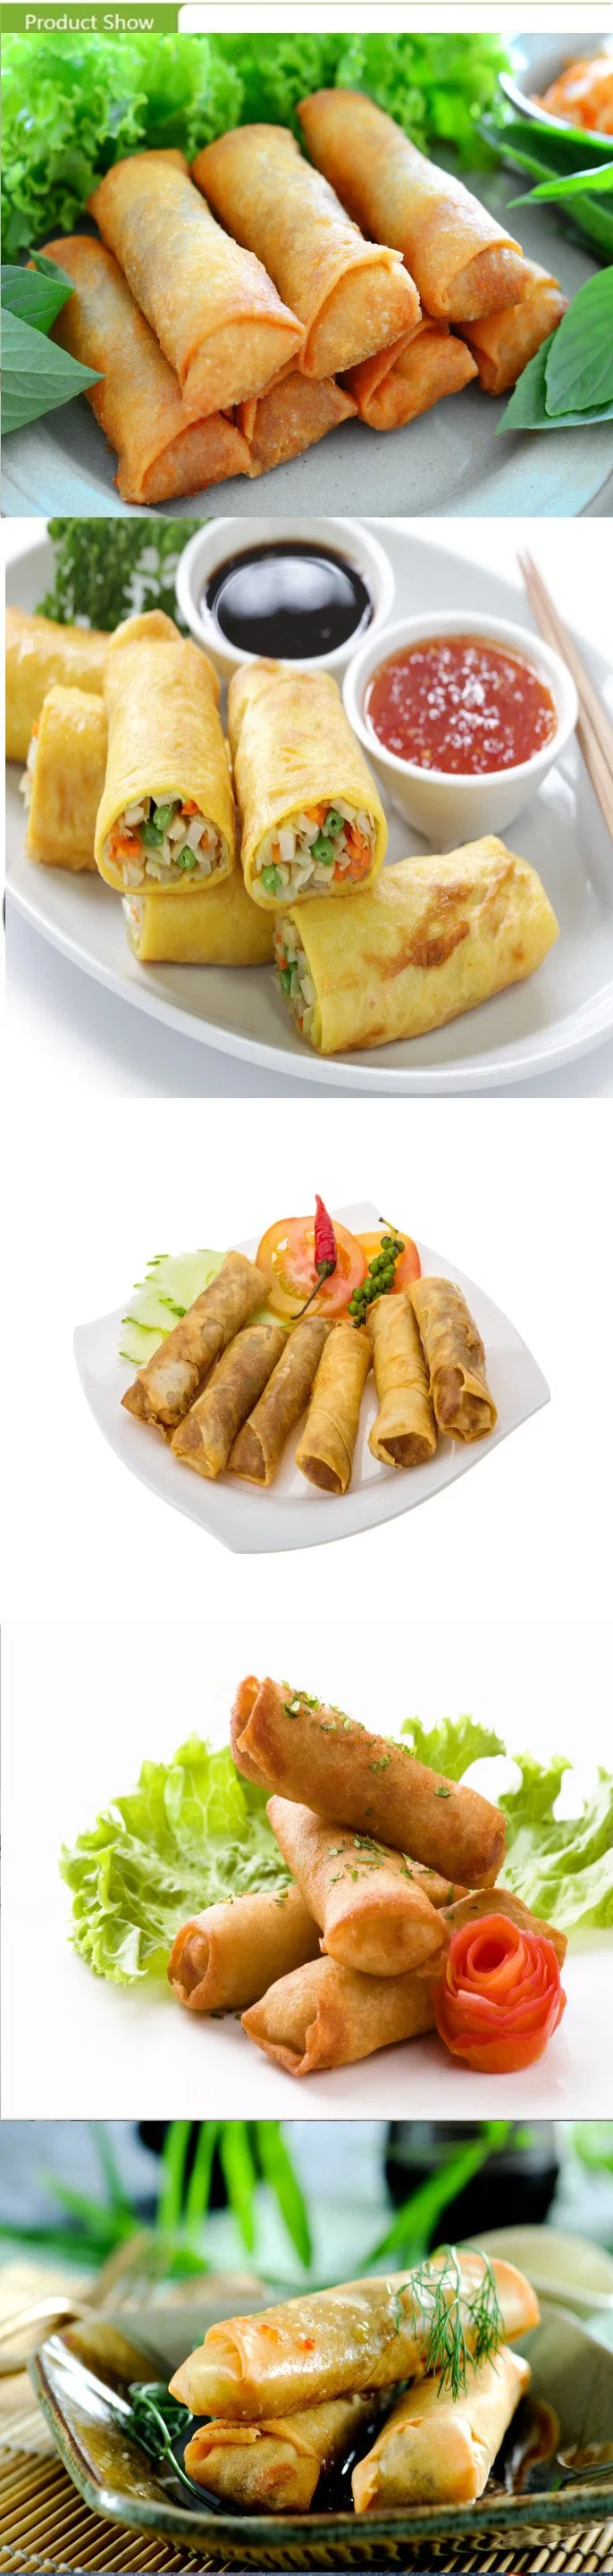 Chinese Delicious Pasta Frozen Fried Spring Rolls with Vegetables Stuffing